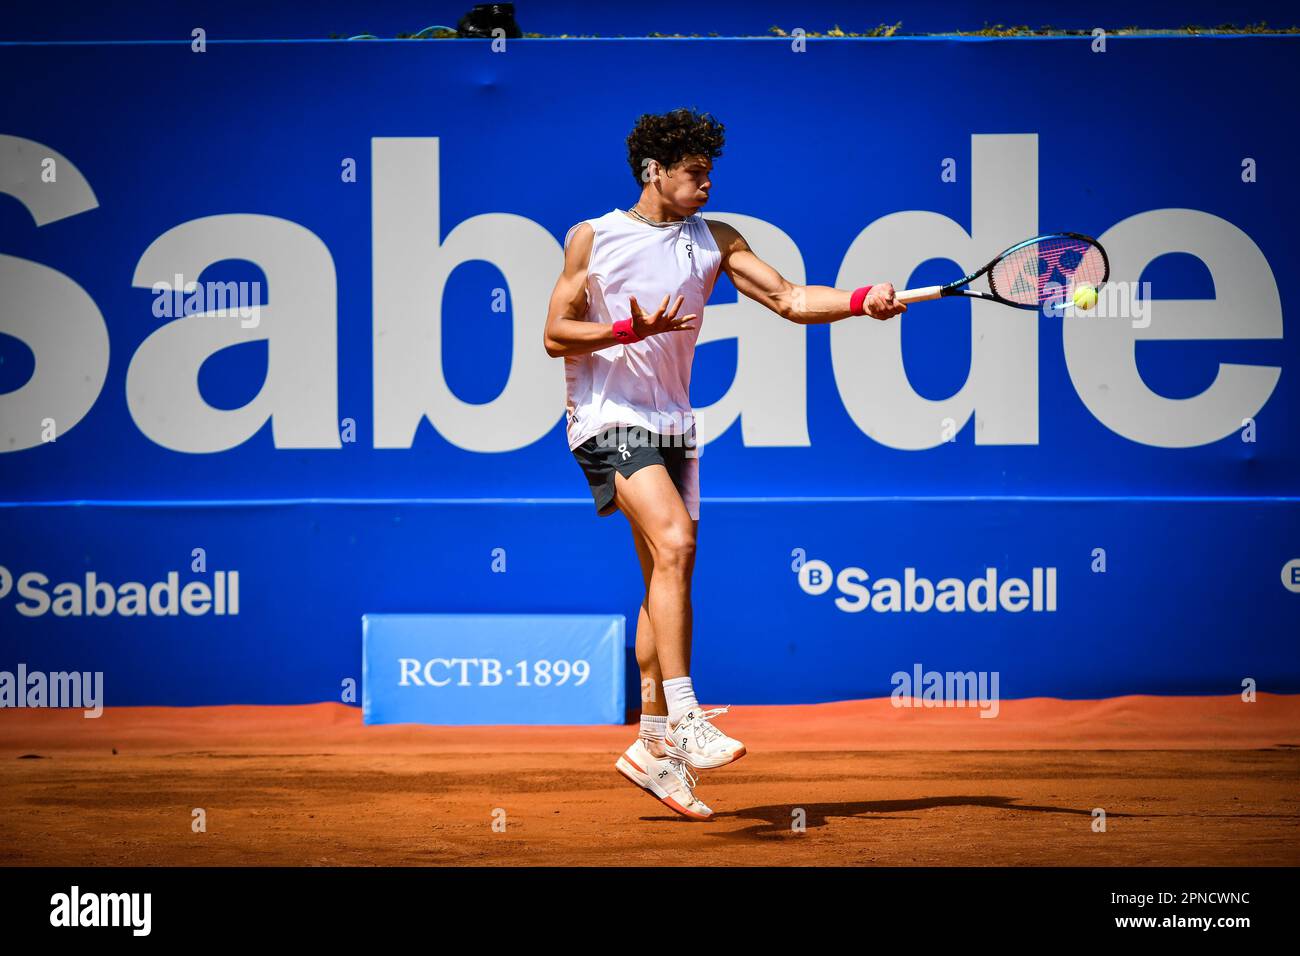 Casper Ruud (Norway) and Ben Shelton (USA) face off during day four of the ATP 500 Barcelona Open Banc Sabadell at Real Club de Tenis de Barcelona, in Barcelona, Spain on April